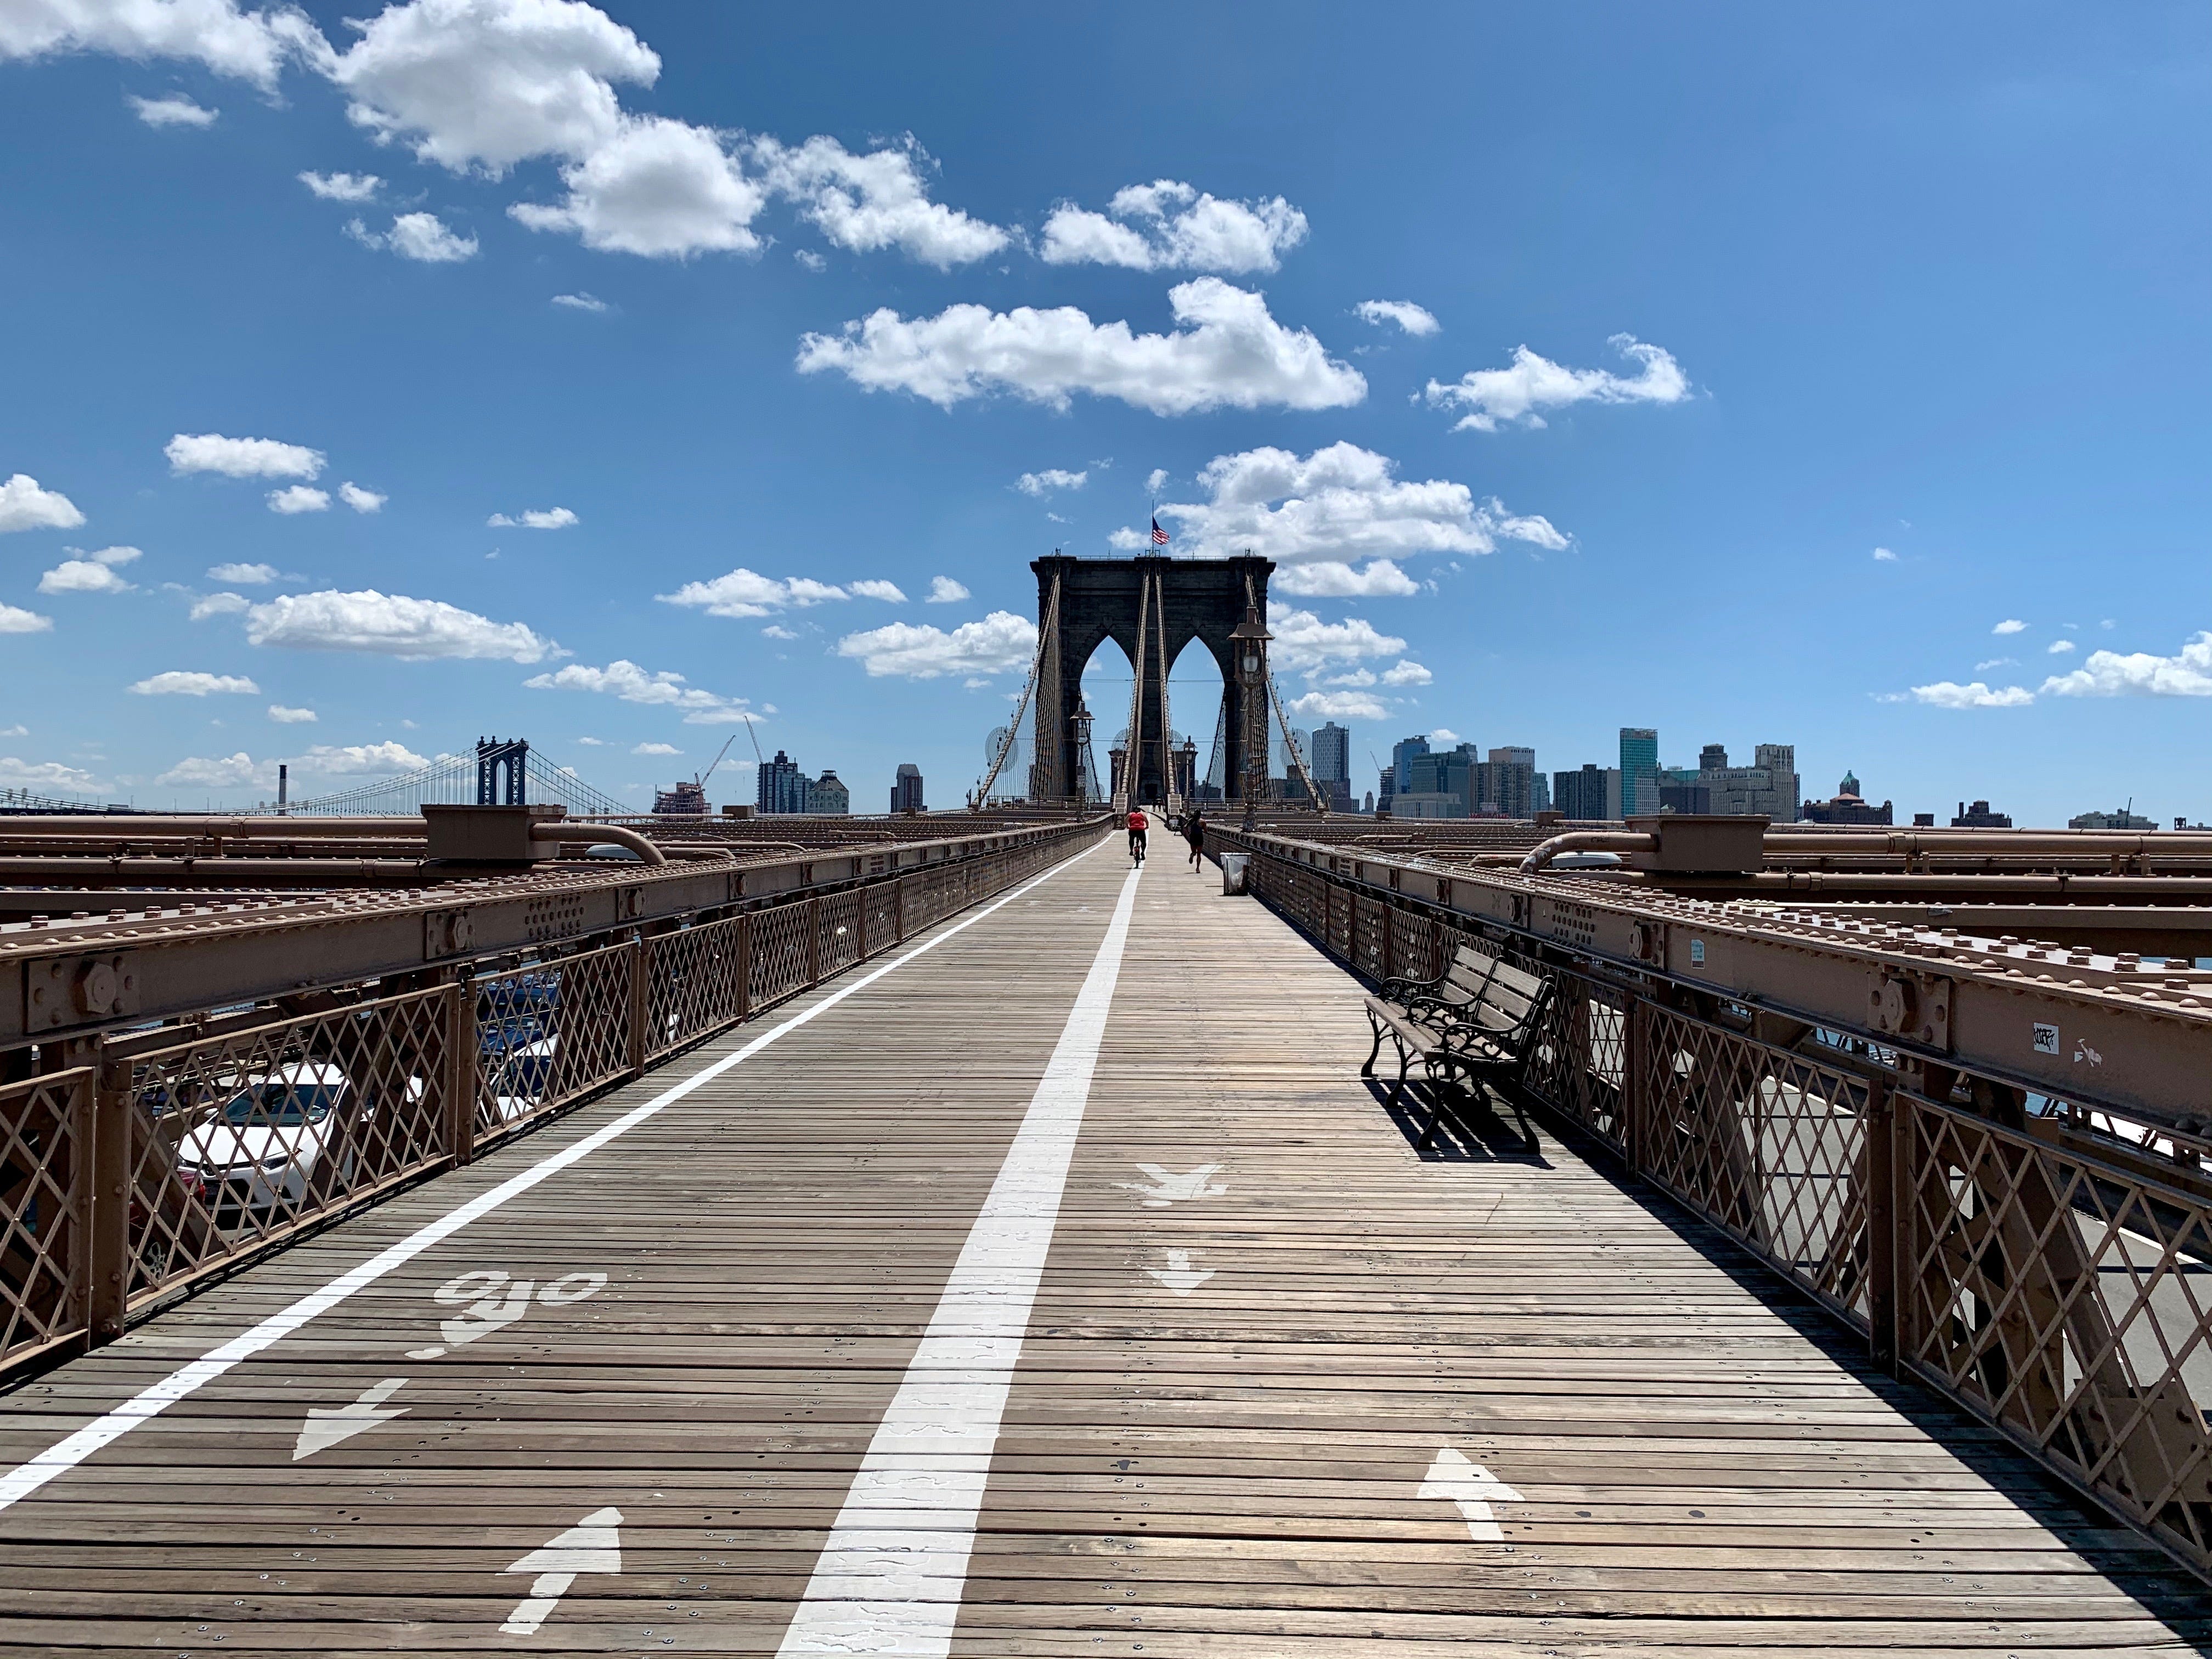 New York City: What's it like to visit after its bout with COVID-19?